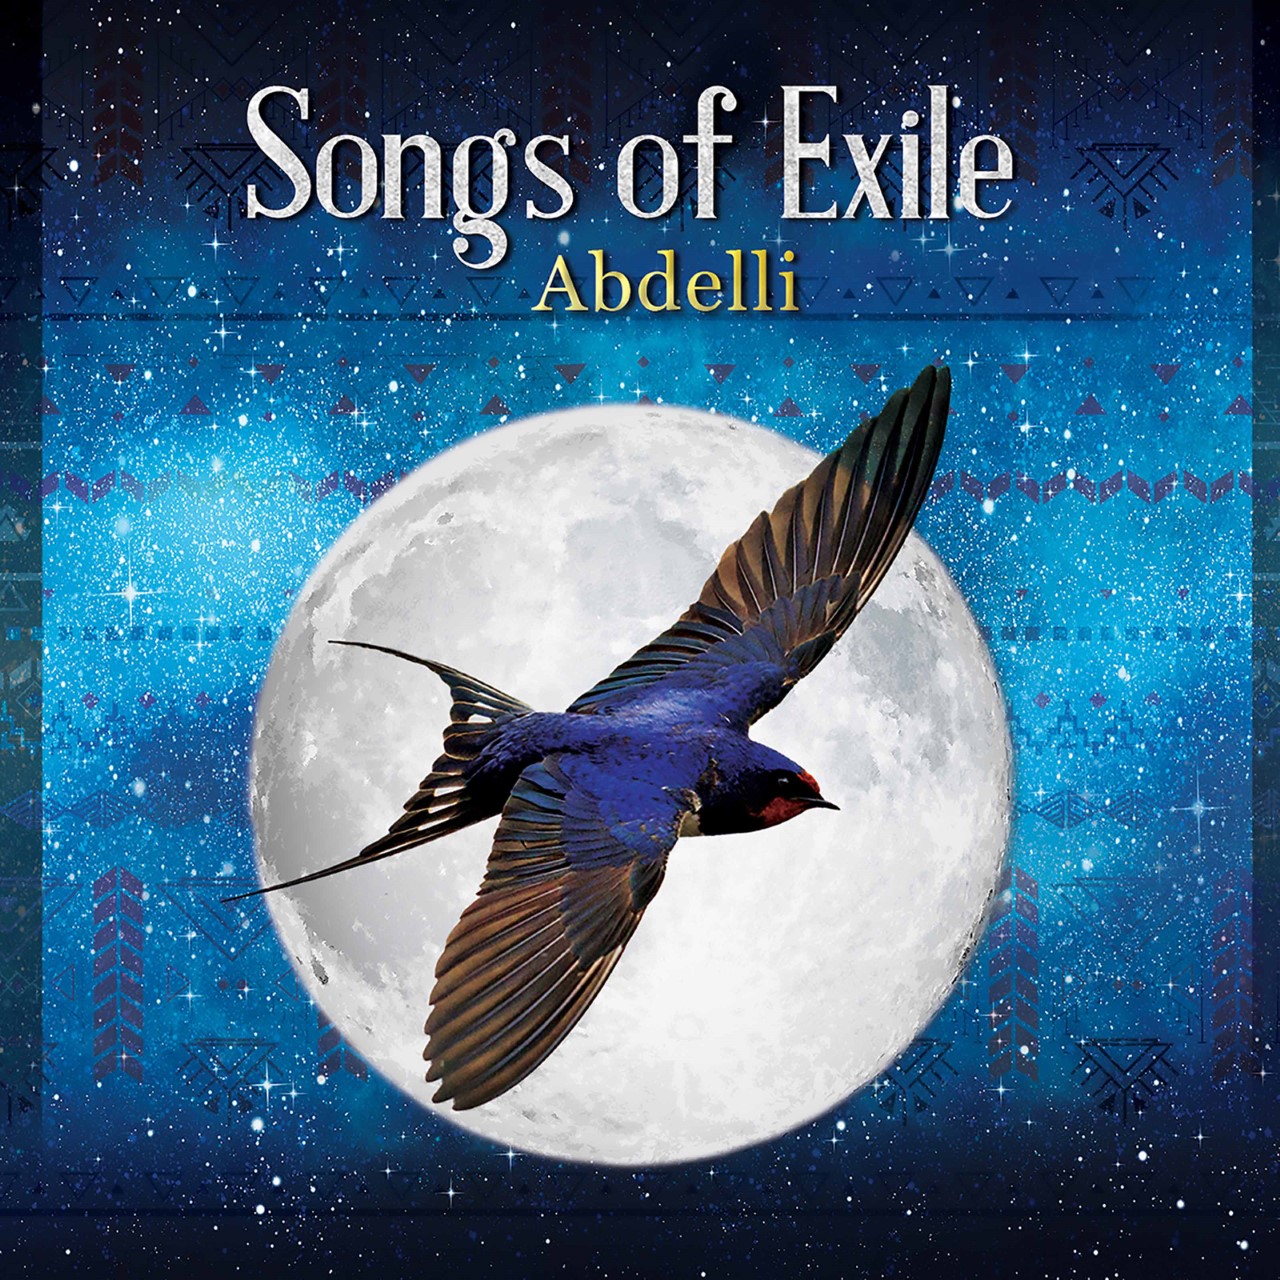 Album cover of "Songs of exile" (distributed by ARC Music)